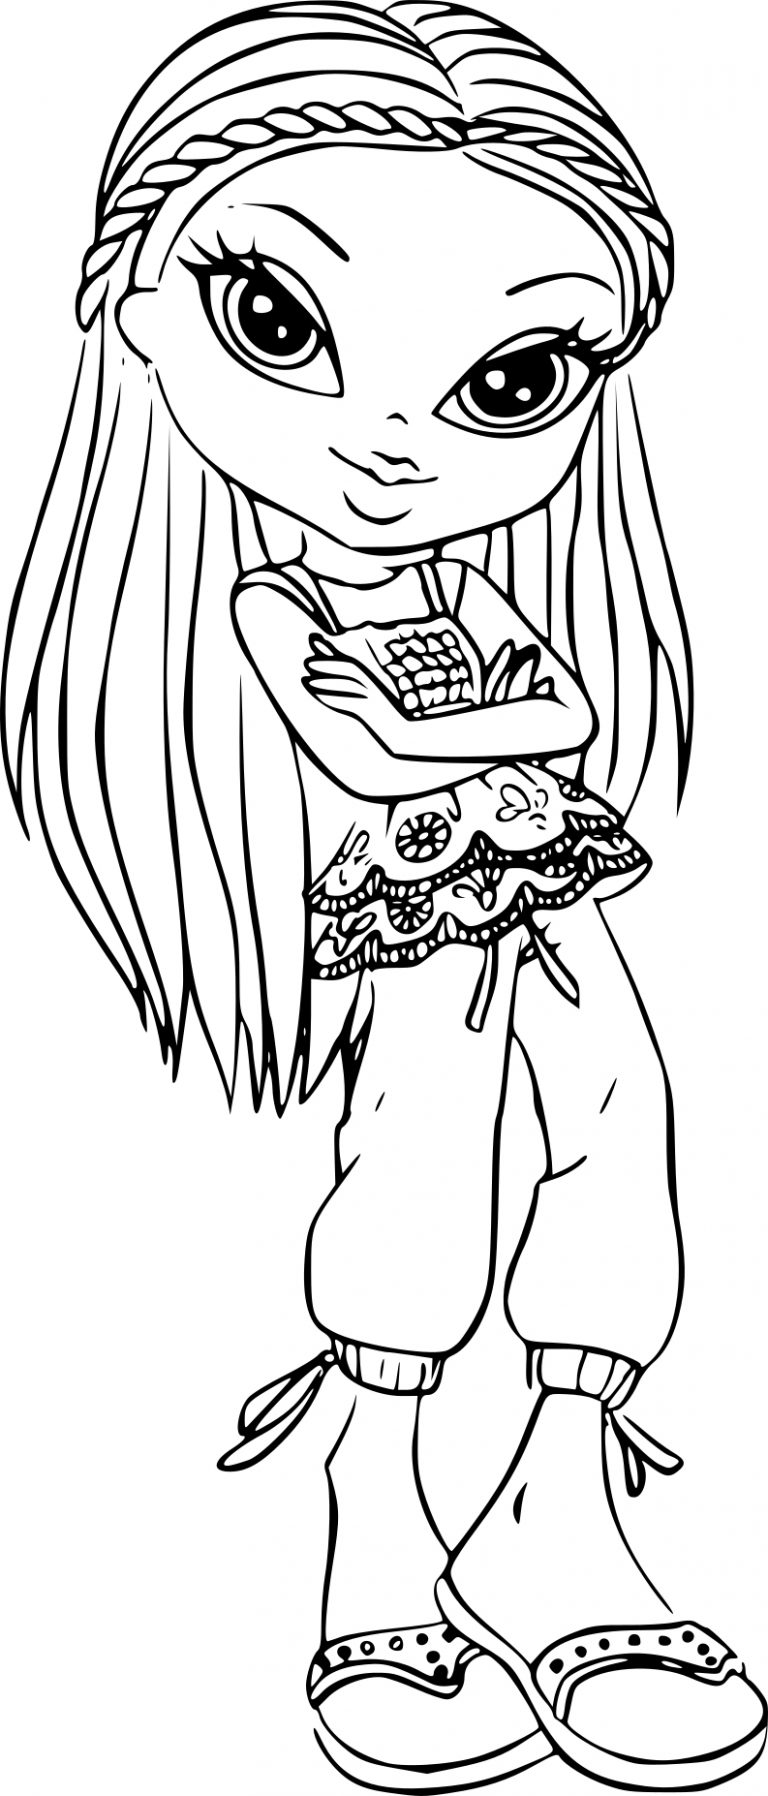 Bratz Kidz coloring page - free printable coloring pages on coloori.com